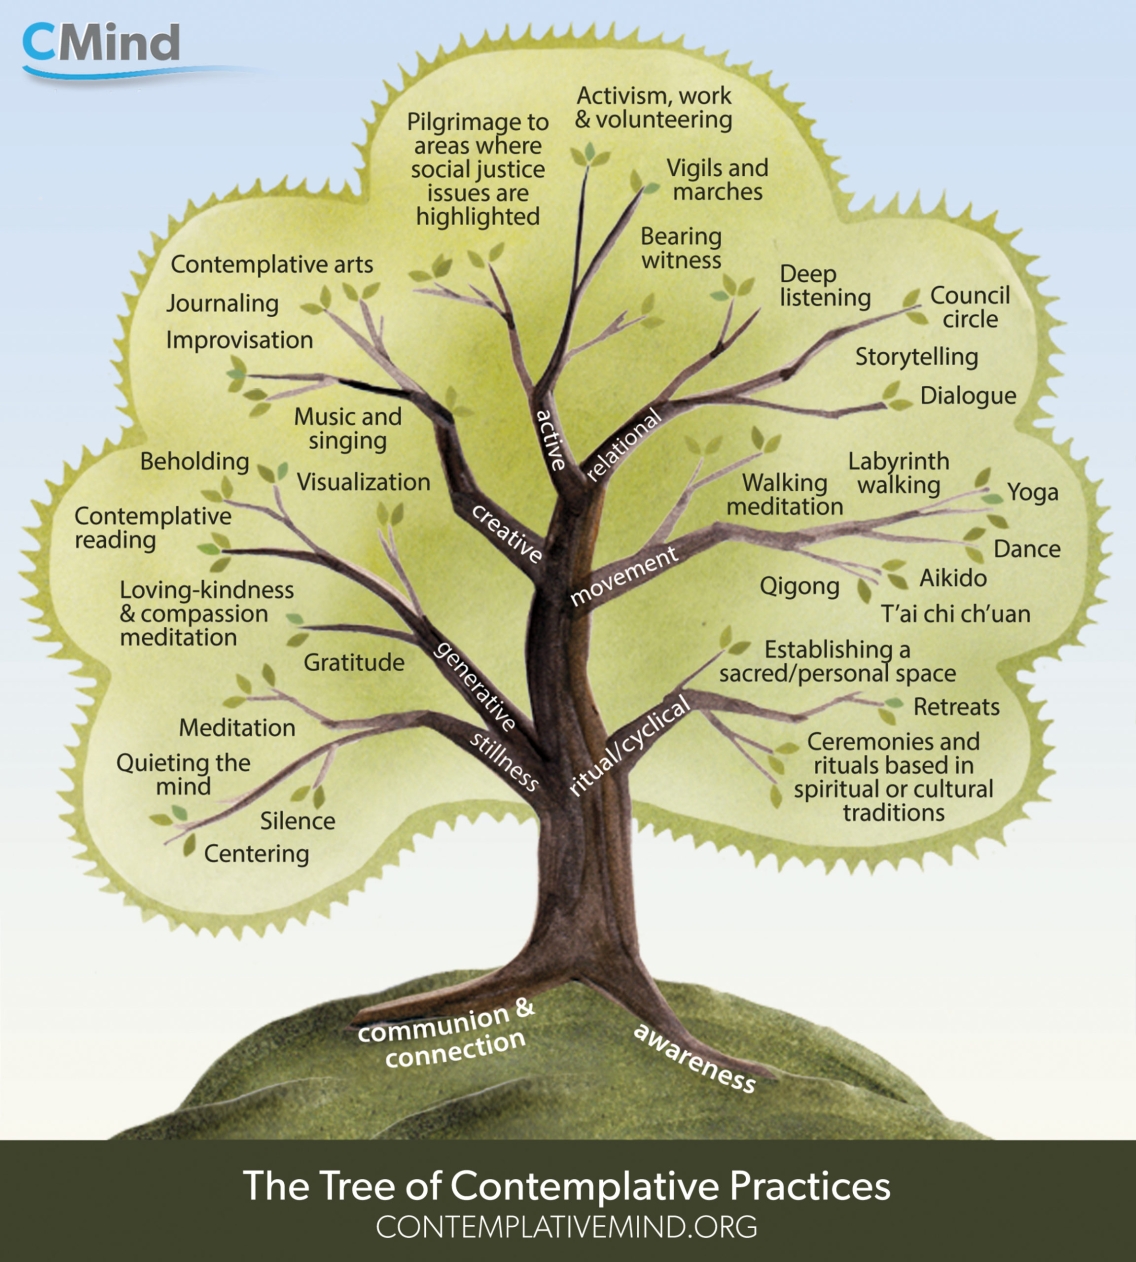 Tree with branches labeled including all of the different types of contemplative practices titled "The Tree of Contemplative Practices" from CMind 